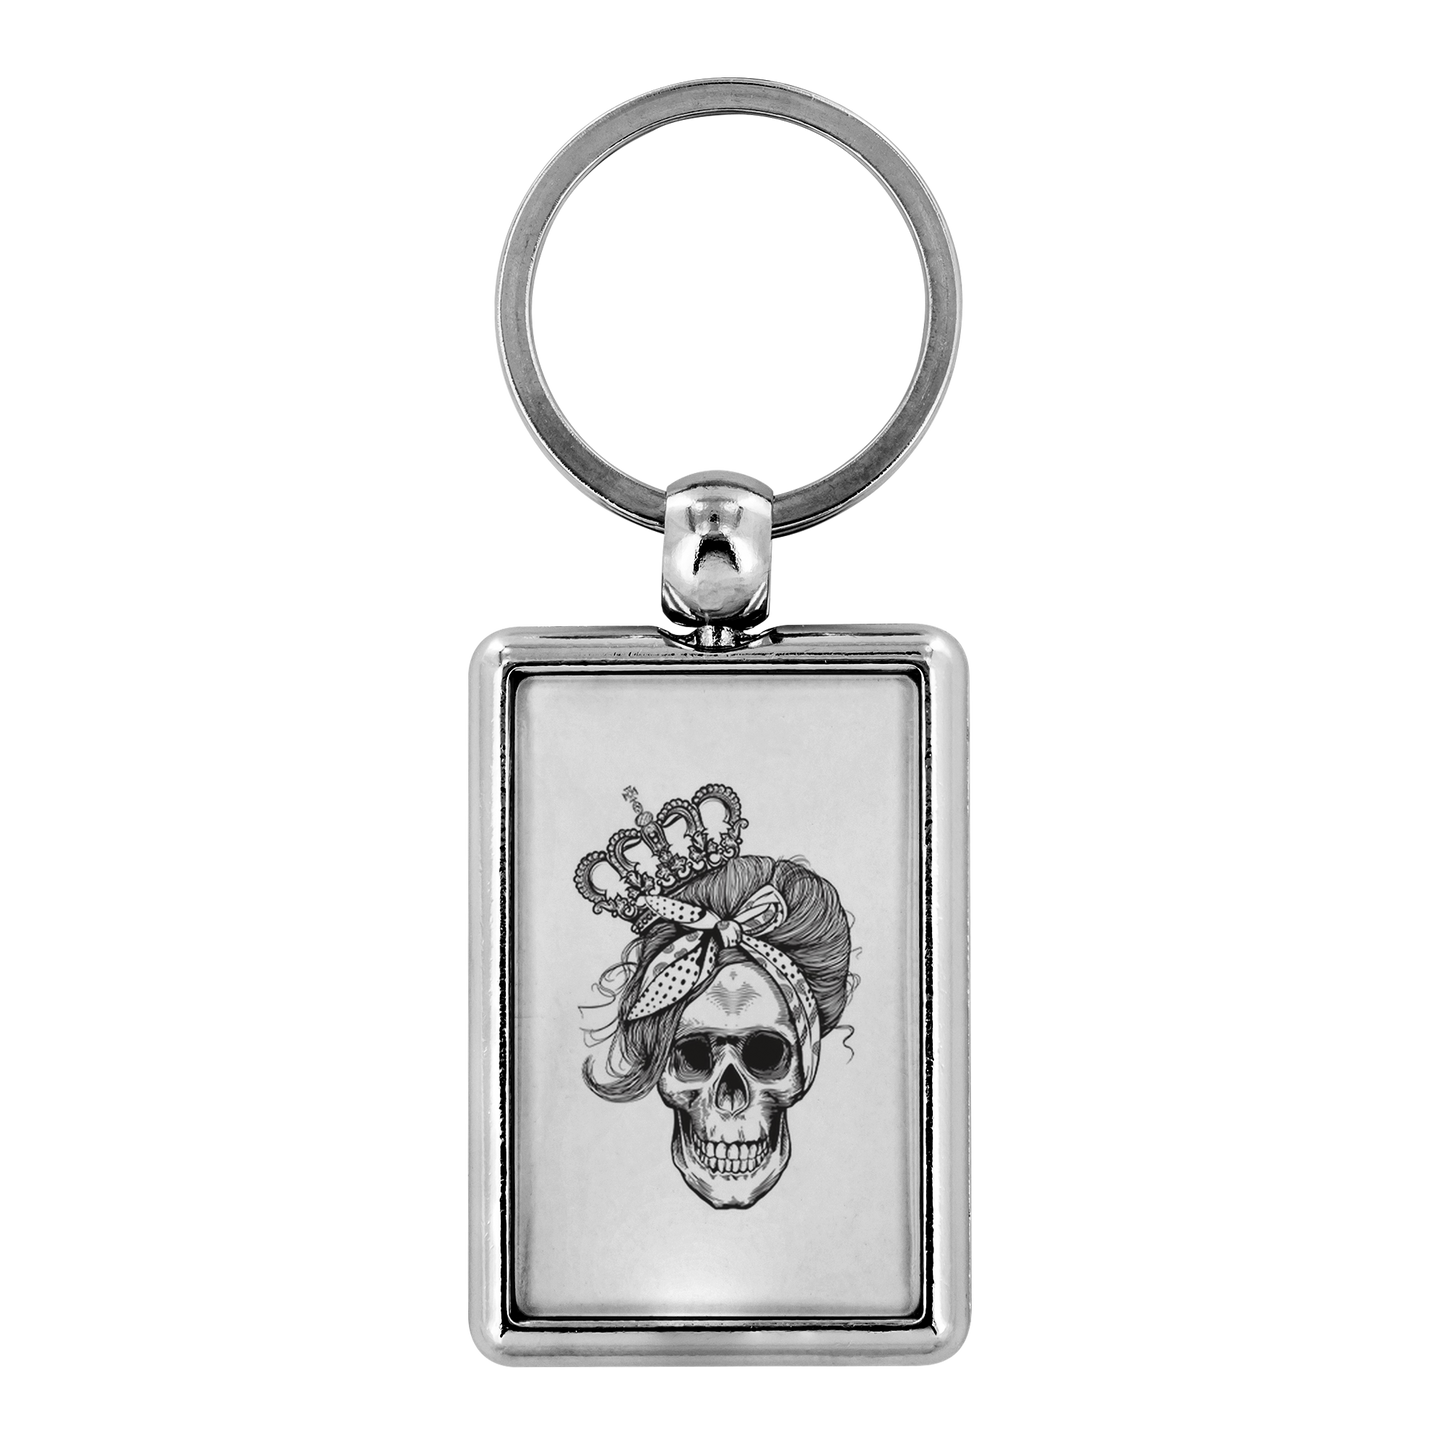 LONG LIVE THE QUEEN SKULL KEYCHAIN